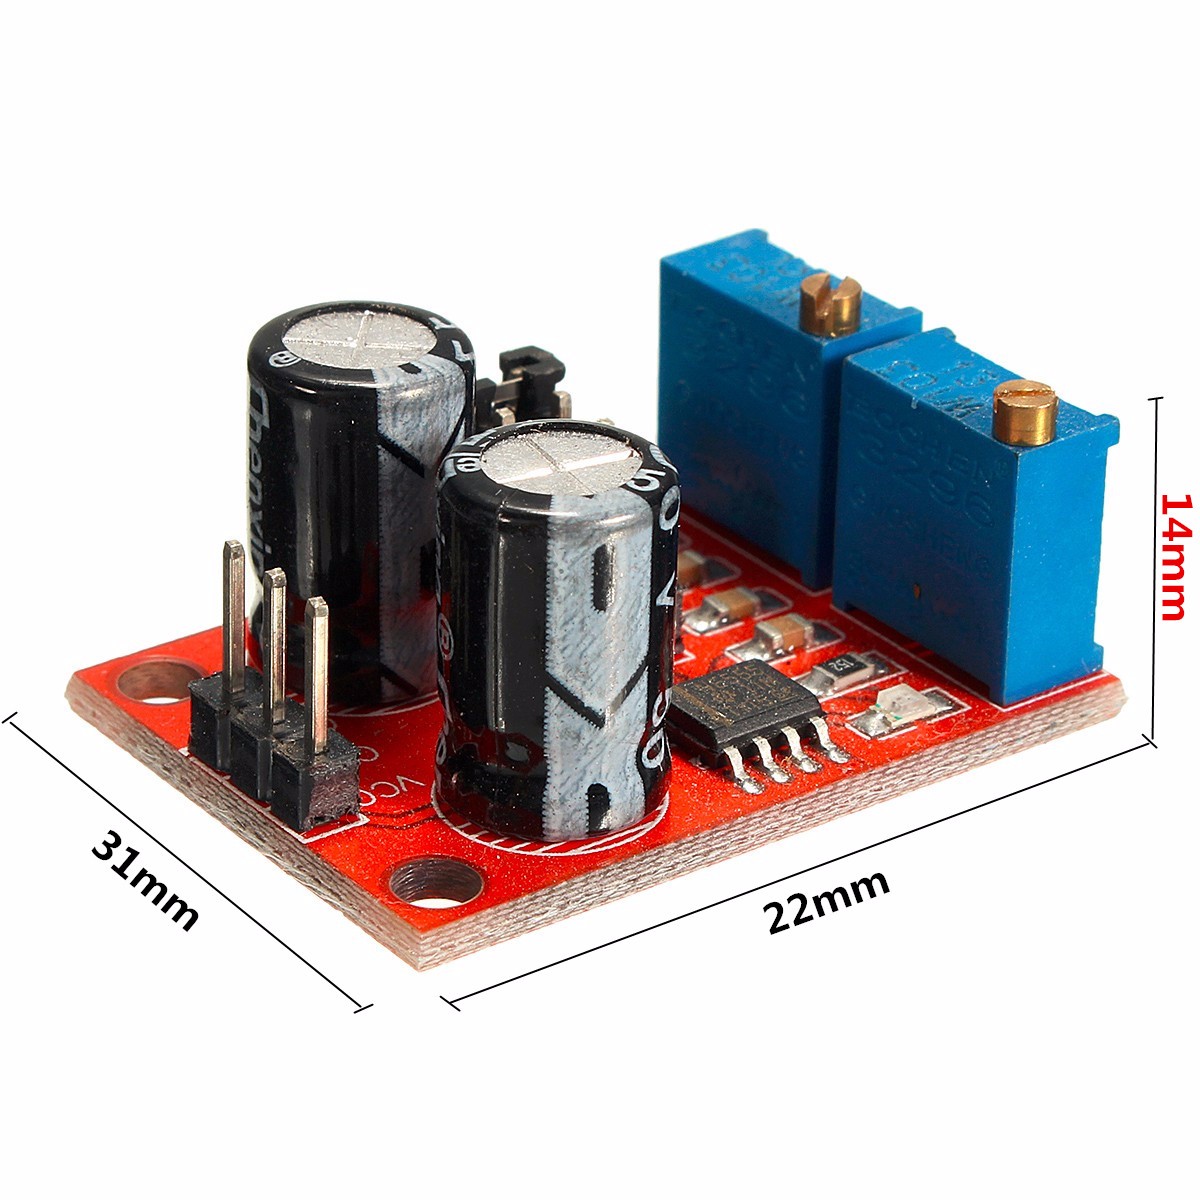 3pcs-NE555-Pulse-Frequency-Duty-Cycle-Adjustable-Module-Square-Wave-Signal-Generator-Stepper-Motor-D-1167072